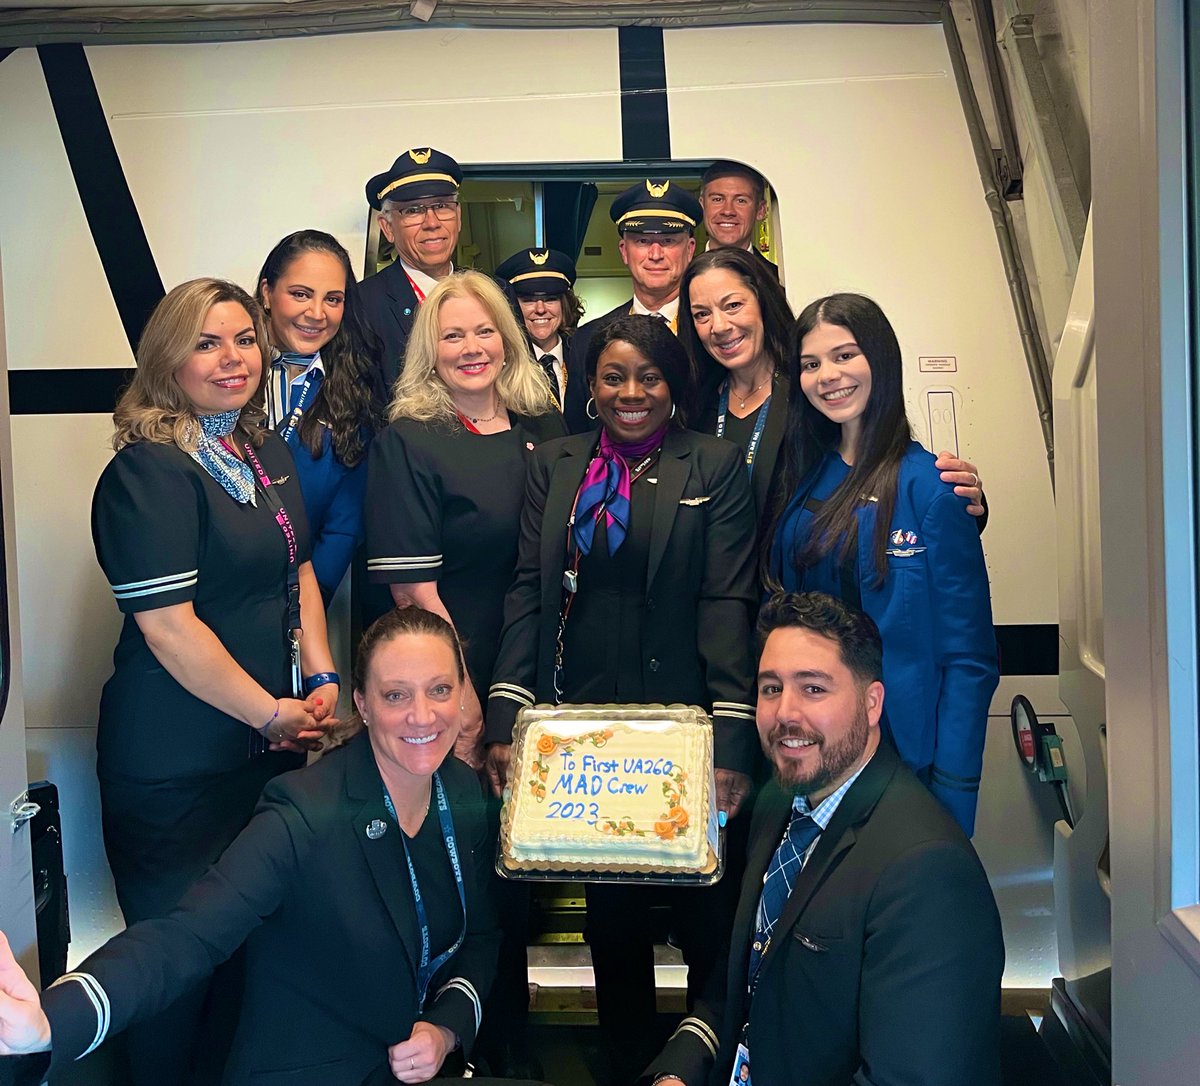 Surprise & Delight, cake style!🎂💙Thank you to our Gate Gourmet partners for celebrating our @united crews planeside as we resume service from @Dulles_Airport to some of the most popular European destinations! 🌍✈️ #Madrid #Edinburgh #Athens #Barcelona @Izzy_United @coach_sally